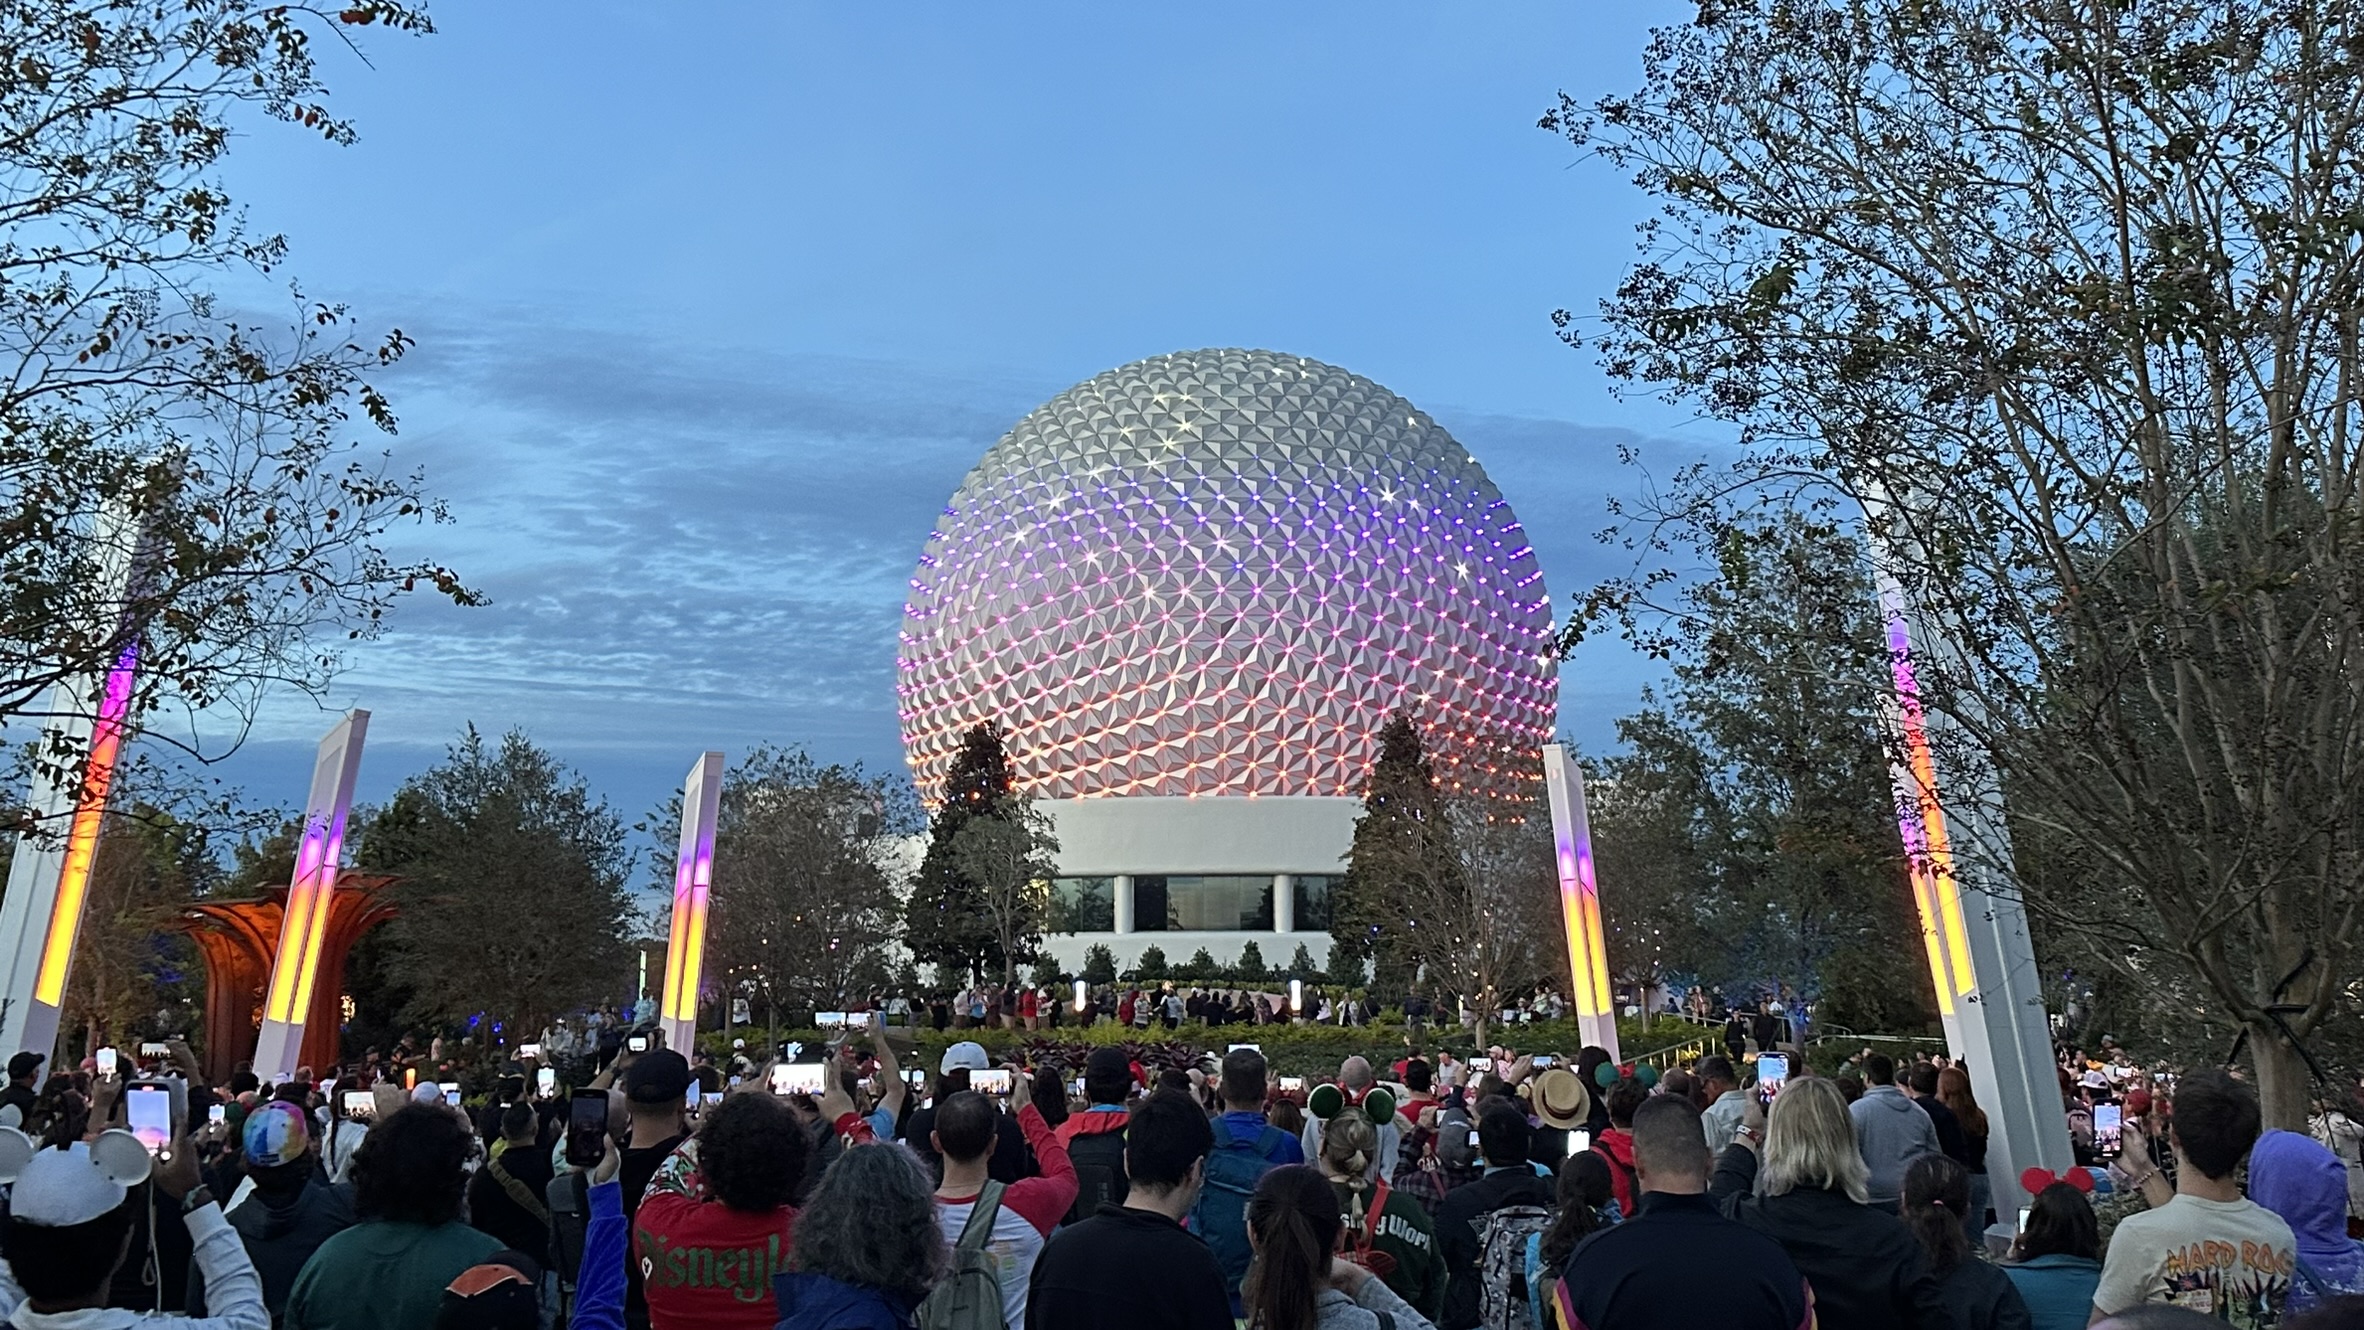 Epcot's World Celebration Garden 27-Minute Ambiance Experience Nighttime in the Newly Opened Oasis!